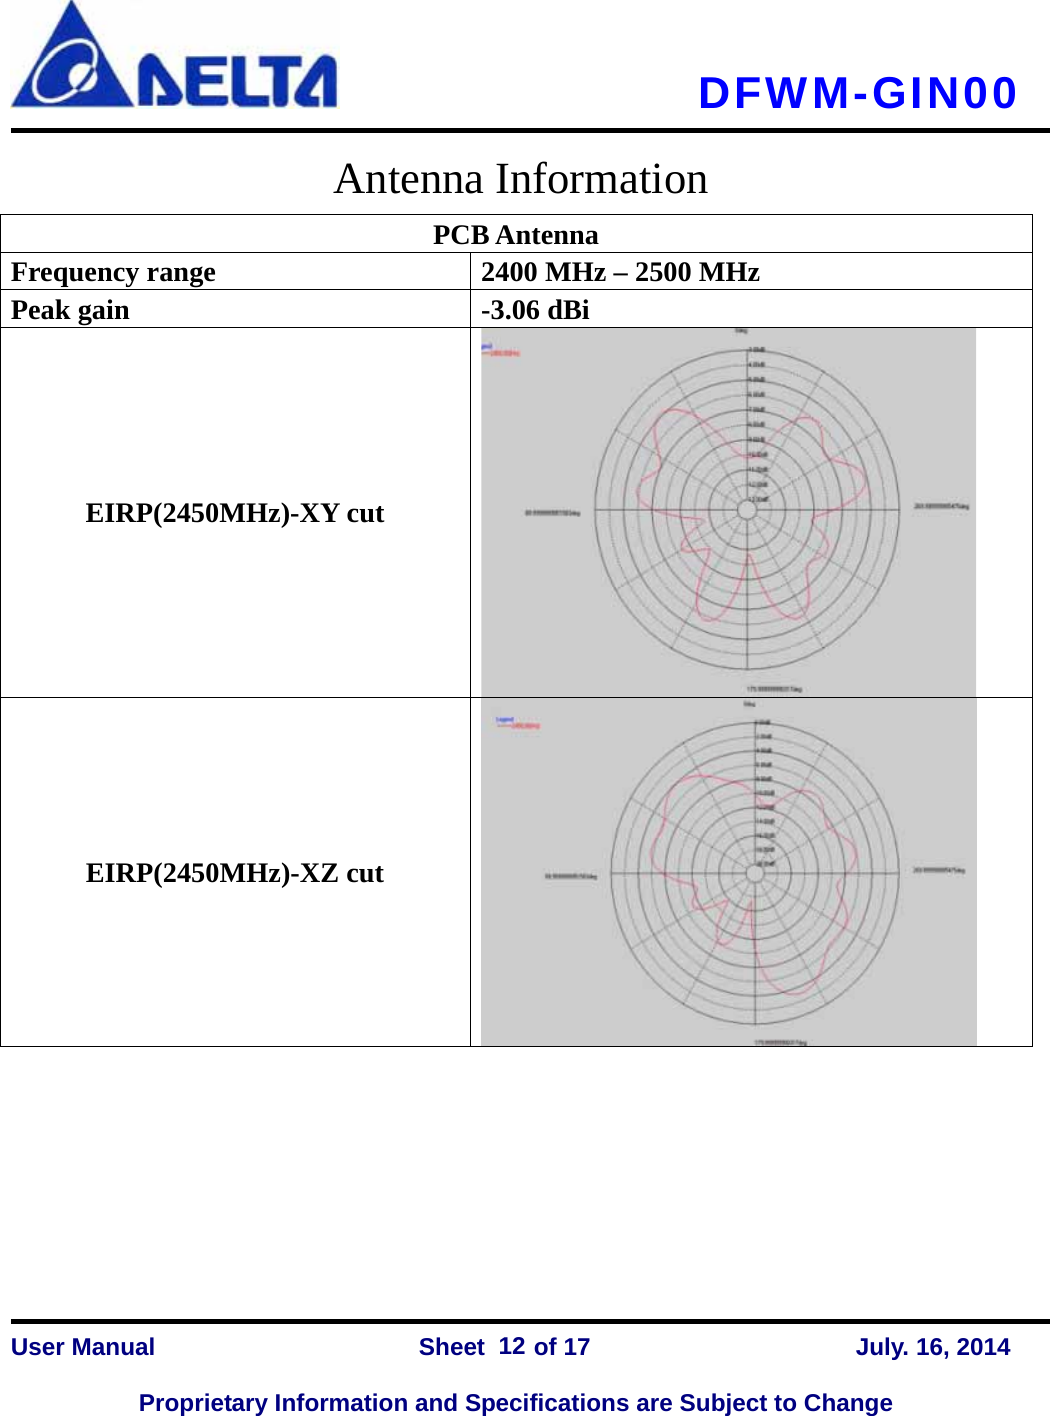   DFWM-GIN00    User Manual                Sheet    of 17      July. 16, 2014  Proprietary Information and Specifications are Subject to Change 12Antenna Information PCB Antenna Frequency range    2400 MHz – 2500 MHz Peak gain  -3.06 dBi EIRP(2450MHz)-XY cut EIRP(2450MHz)-XZ cut 